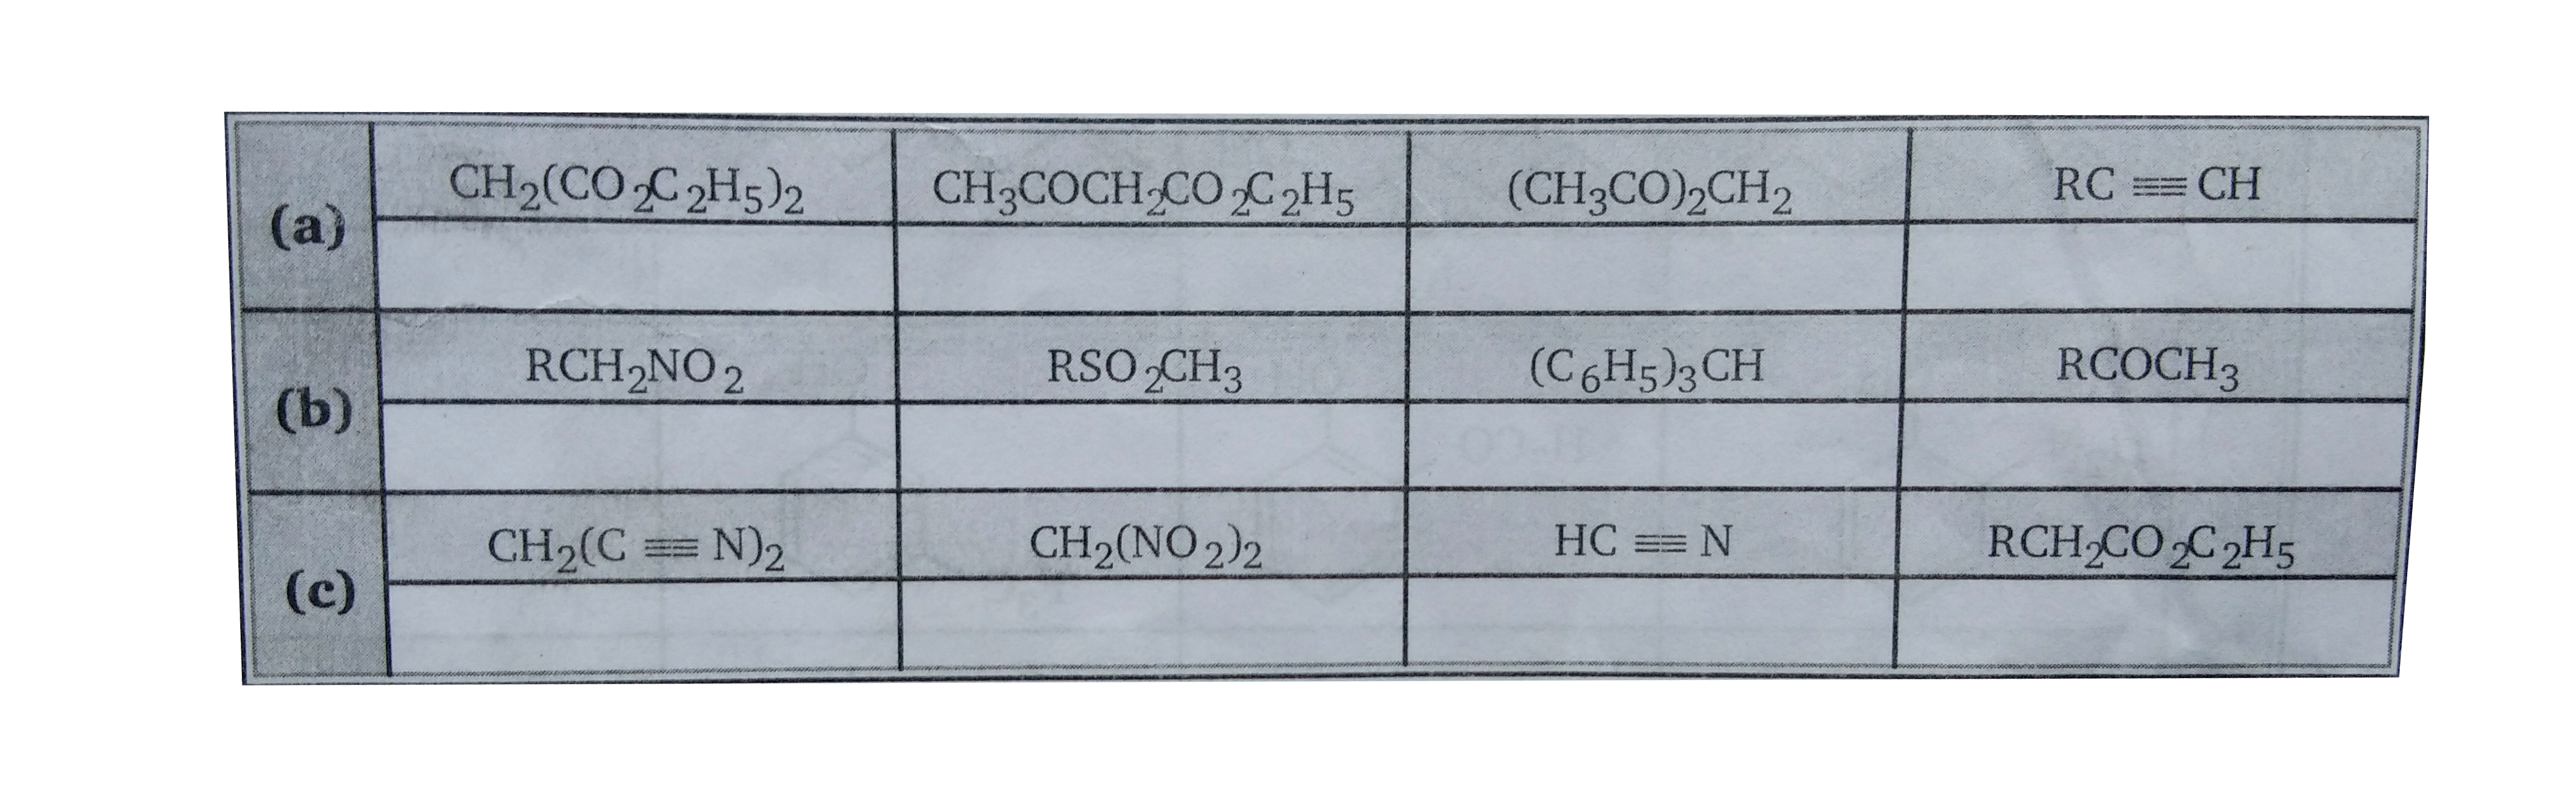 In each of the following sections four compounds are listed. (Decreasing order of acidic strength, 1 is strongest & 4 is weakest).